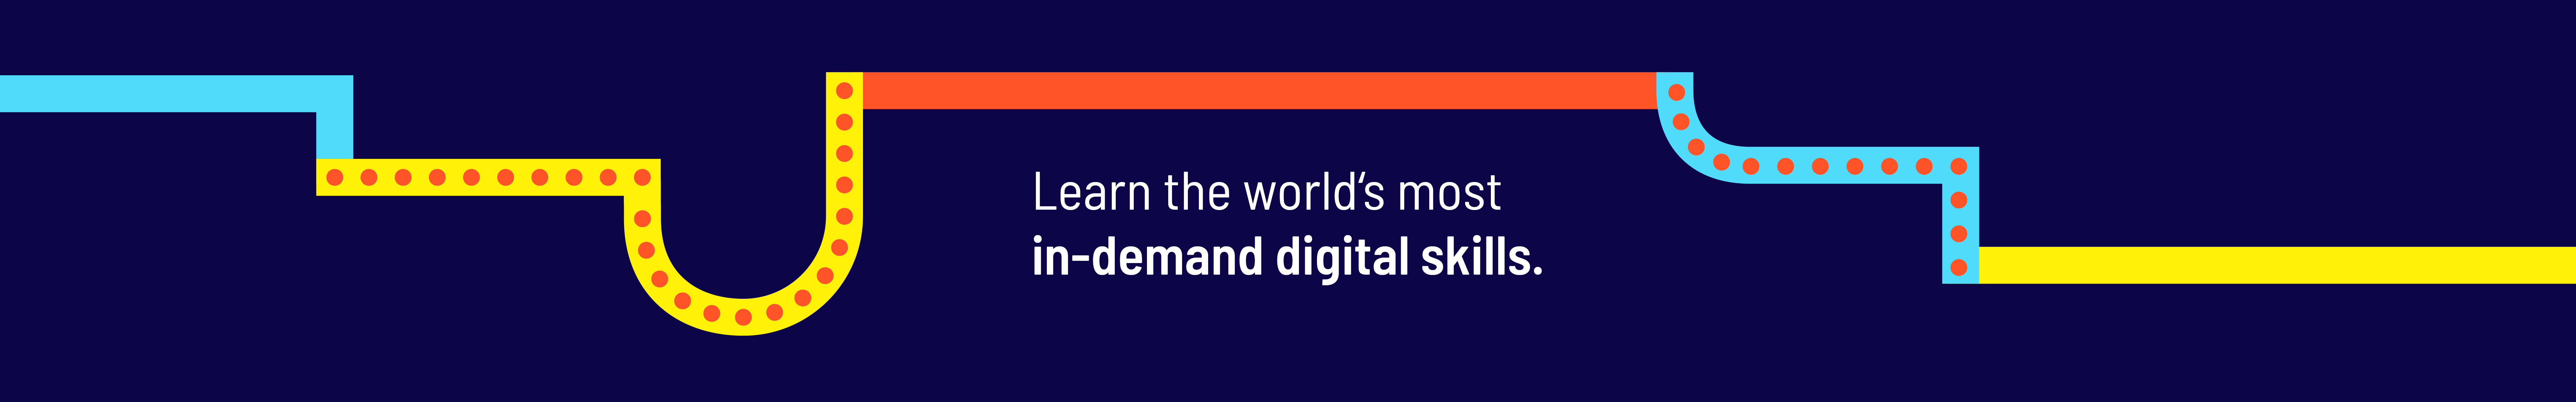 Finance4Learning | Finance4Learning and GrowthTribe | Learn the worlds's most in-demand digital skills